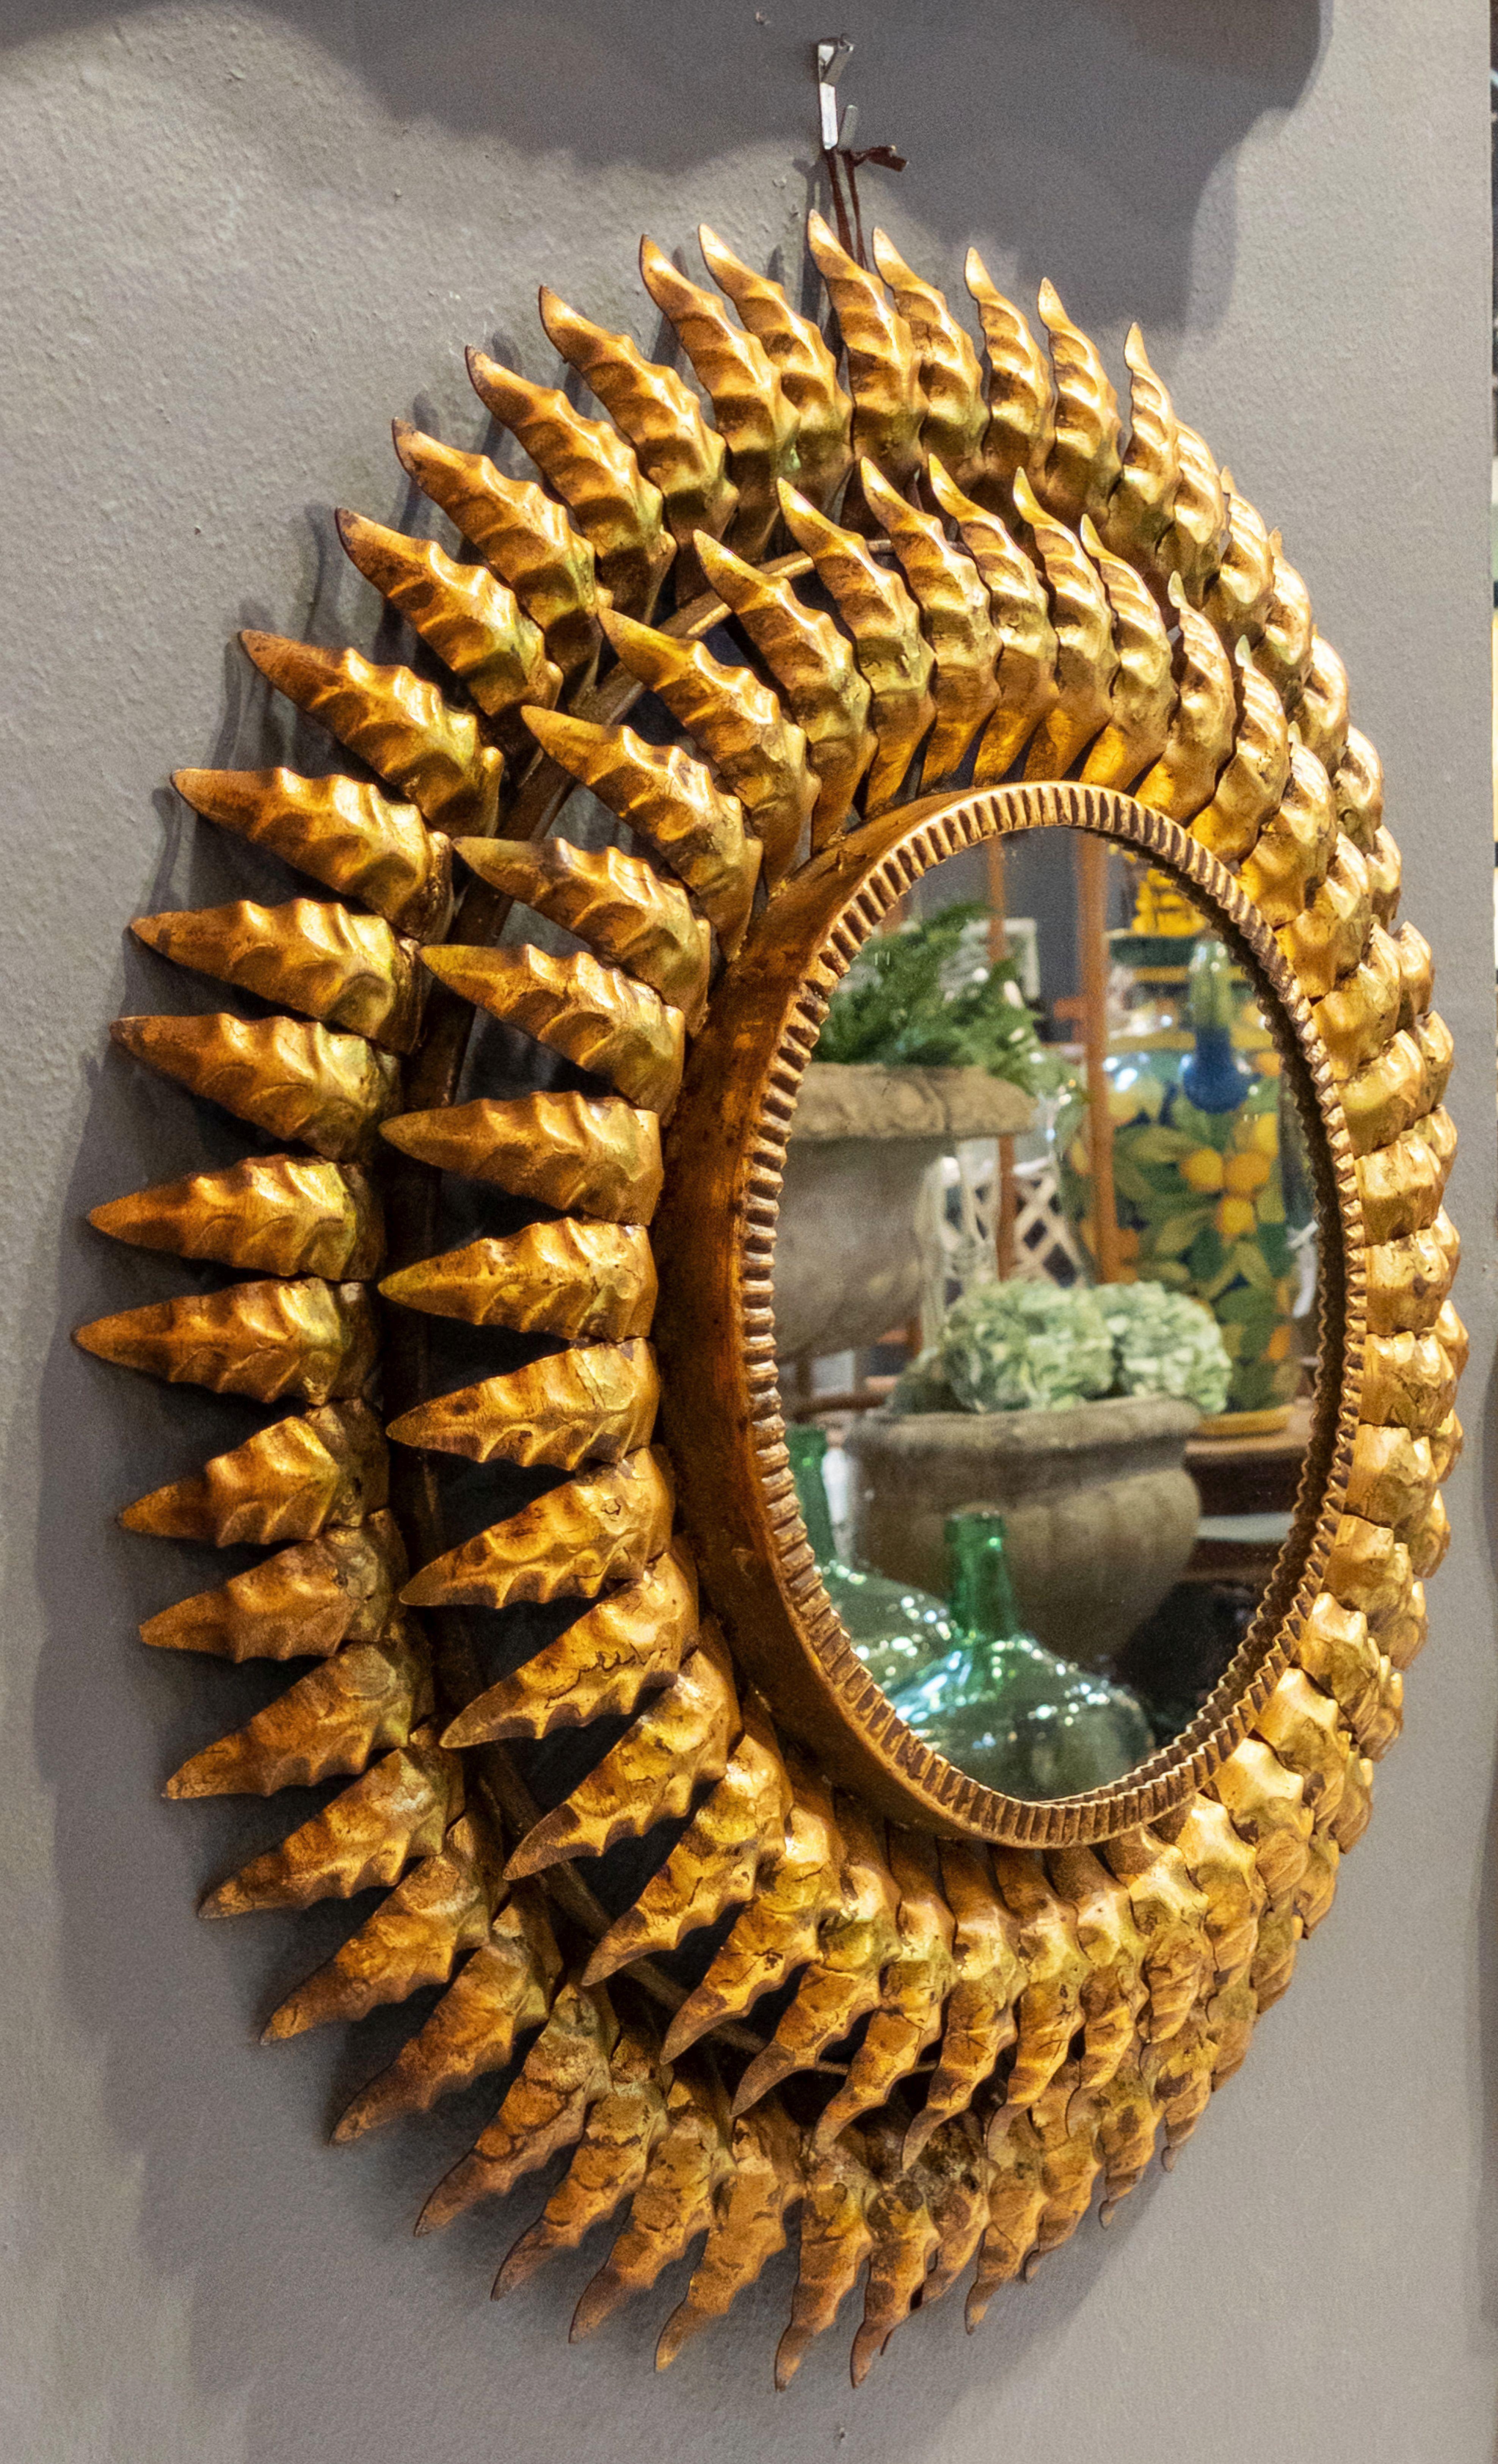 A lovely French sunburst (or starburst) mirror of gilt metal, 20 inches diameter, with round mirrored glass center in moulded frame.